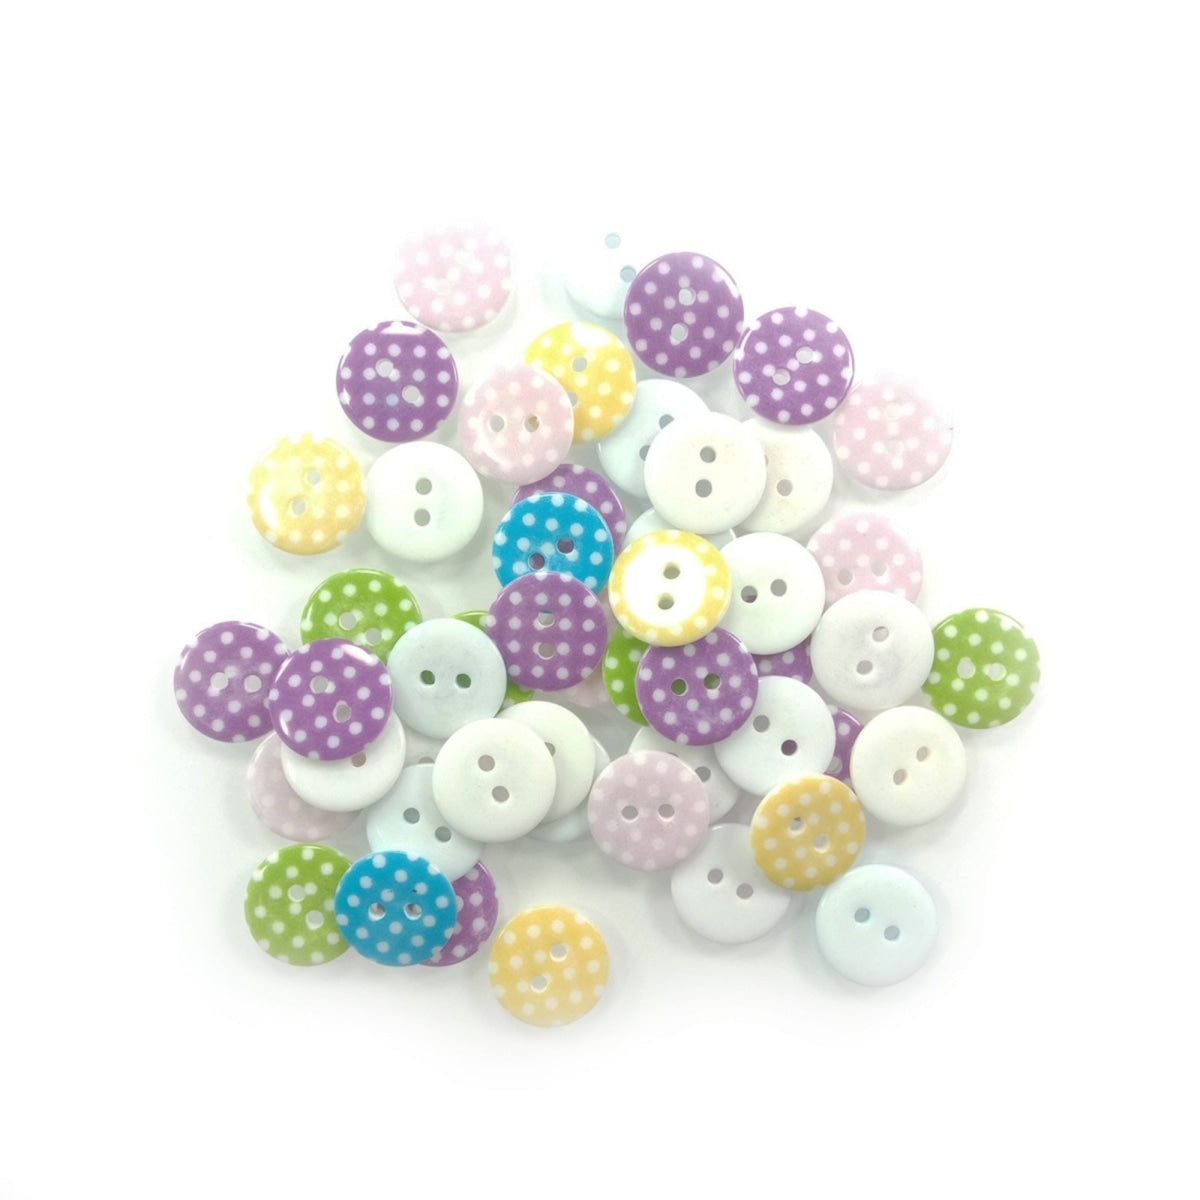 50X 15Mm Dot Pattern Clothing Buttons Dots Dotted 2-Hole Flat Back